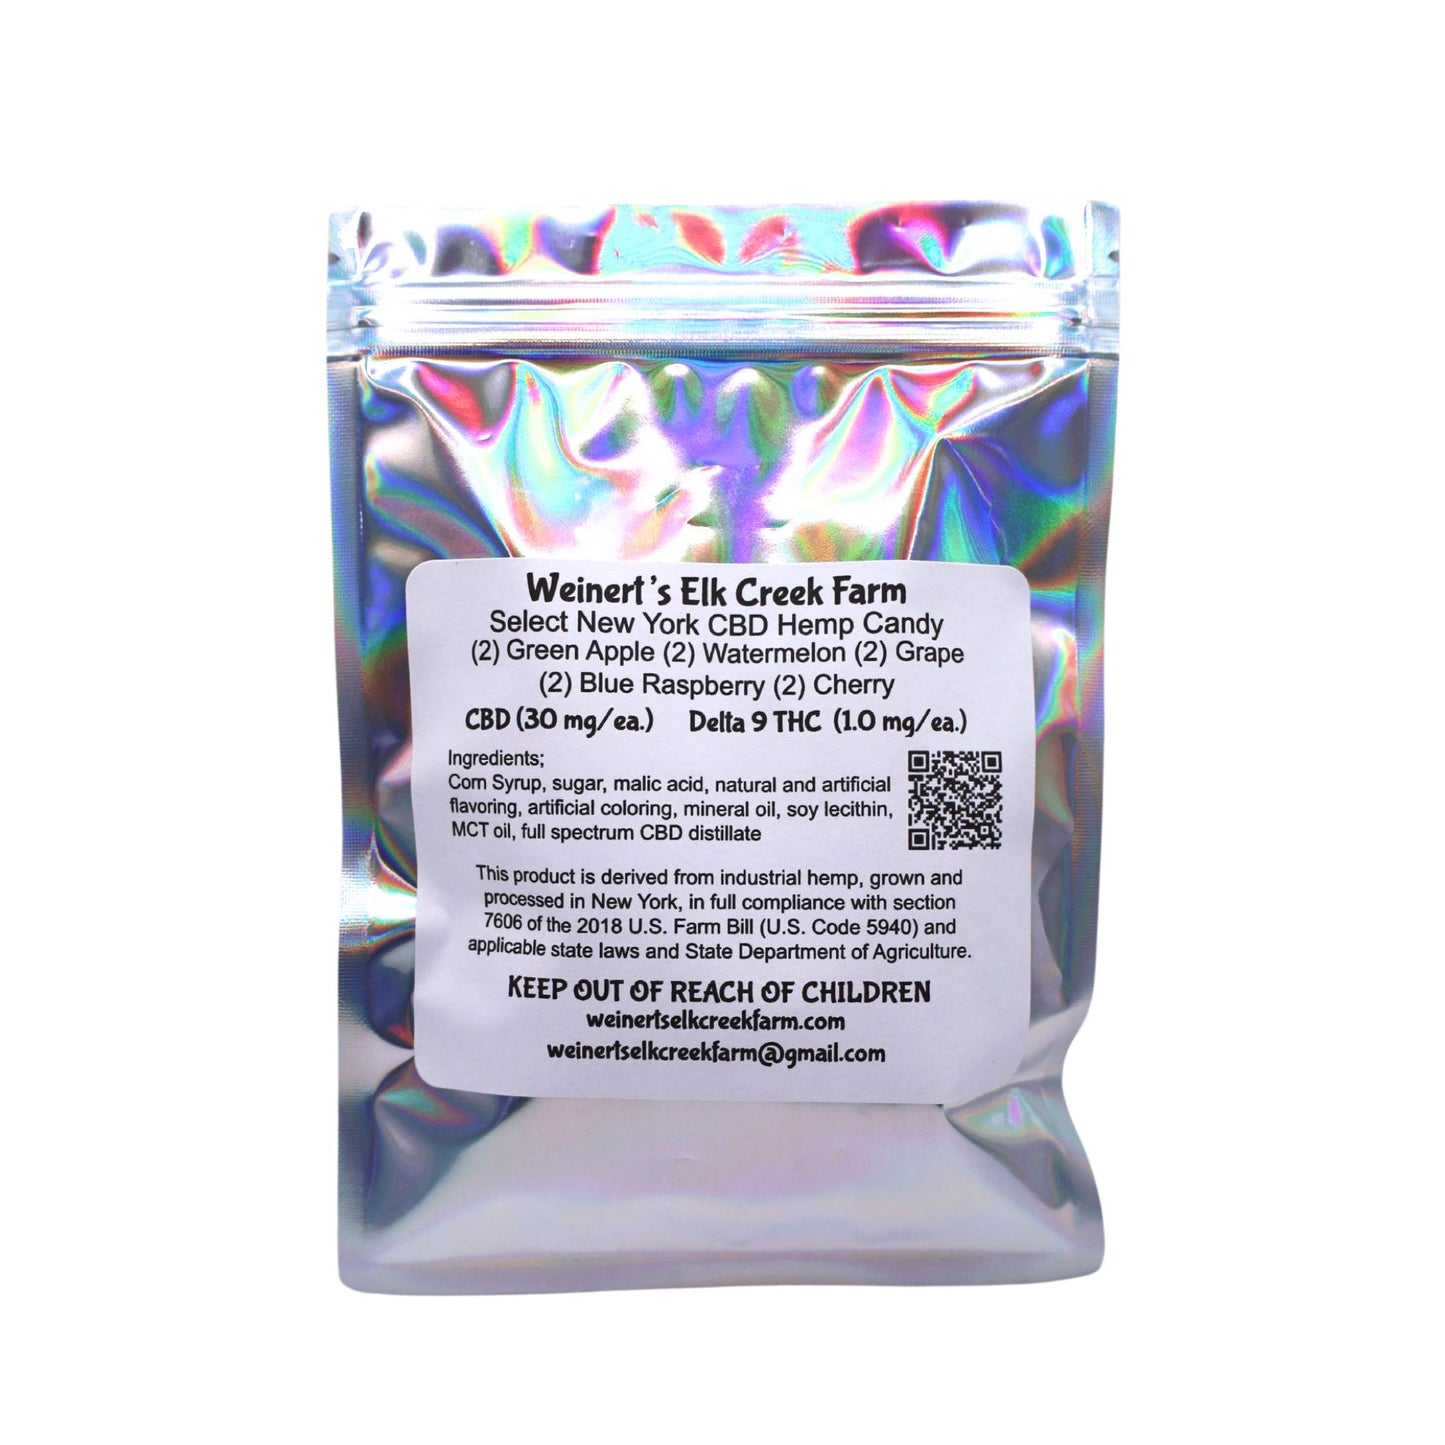 The back packages of Premium CBD infused hard candies. The package includes flavors like Green Apple, Watermelon, Grape, Blue Raspberry and Cherry